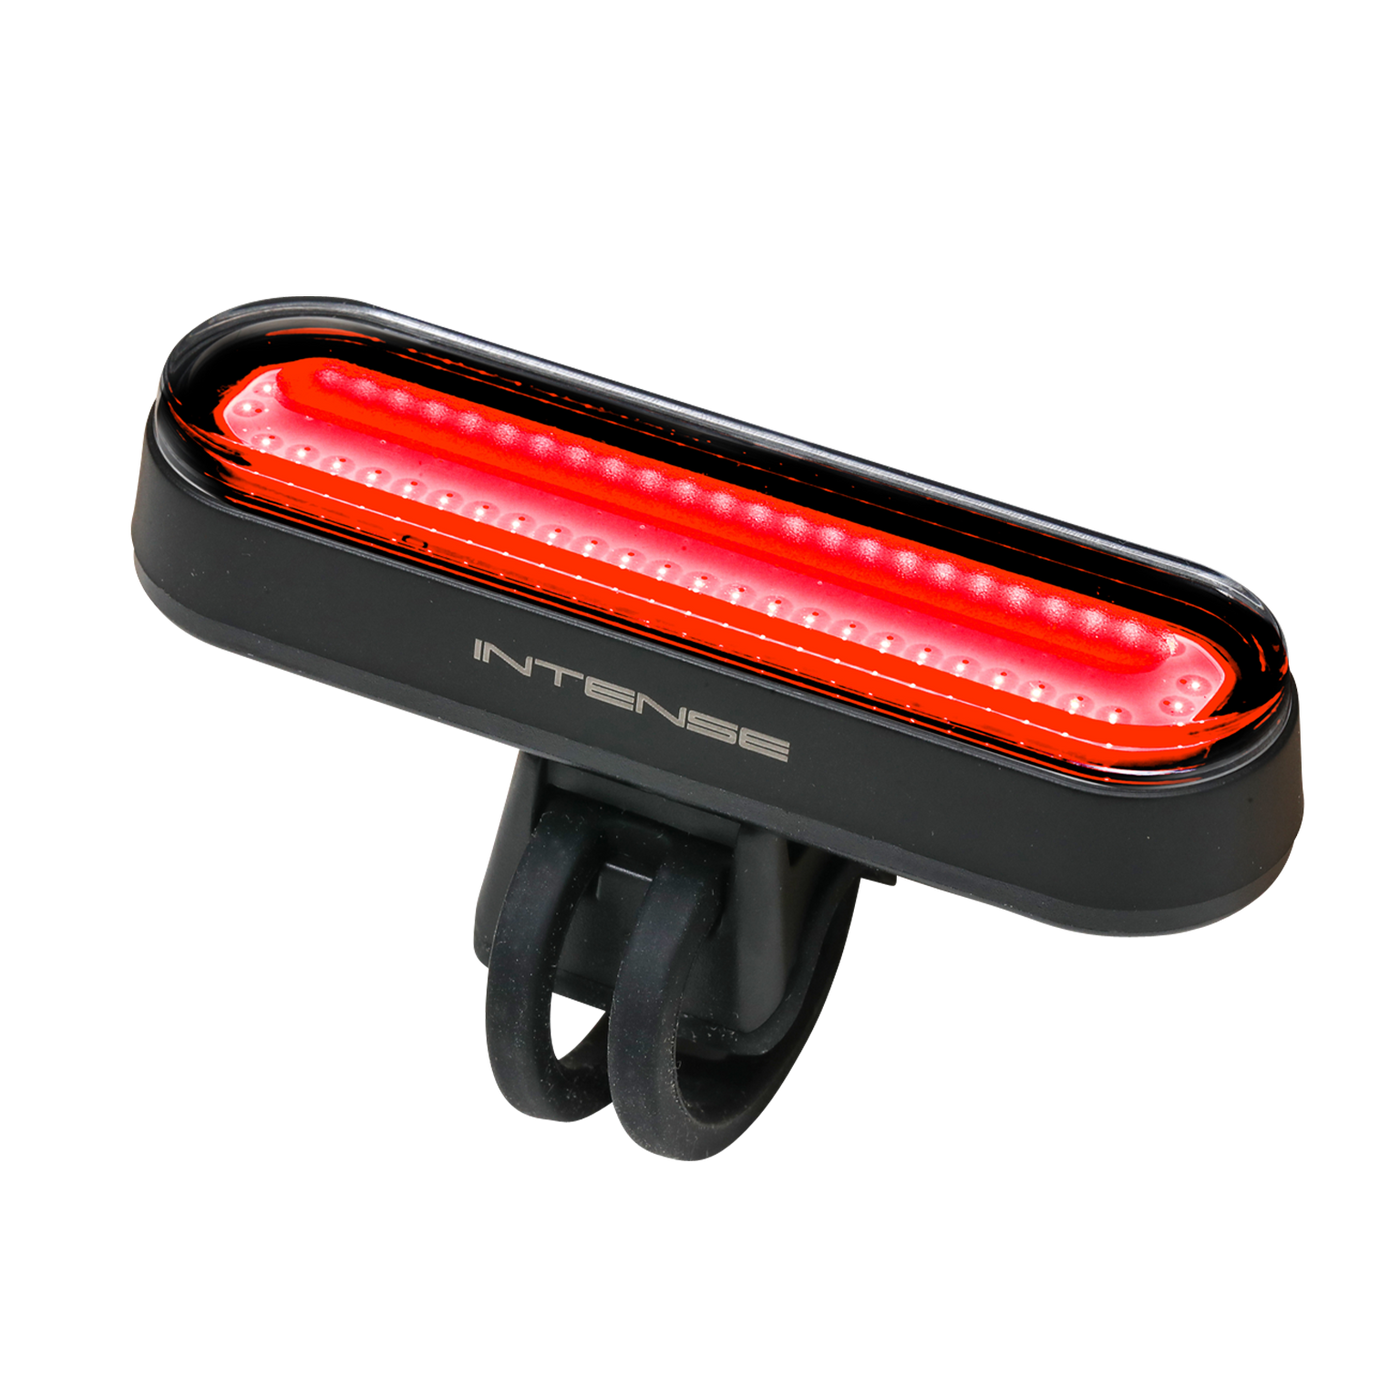 Shop Rear Bicycle Lights for sale online at intensecycles.com